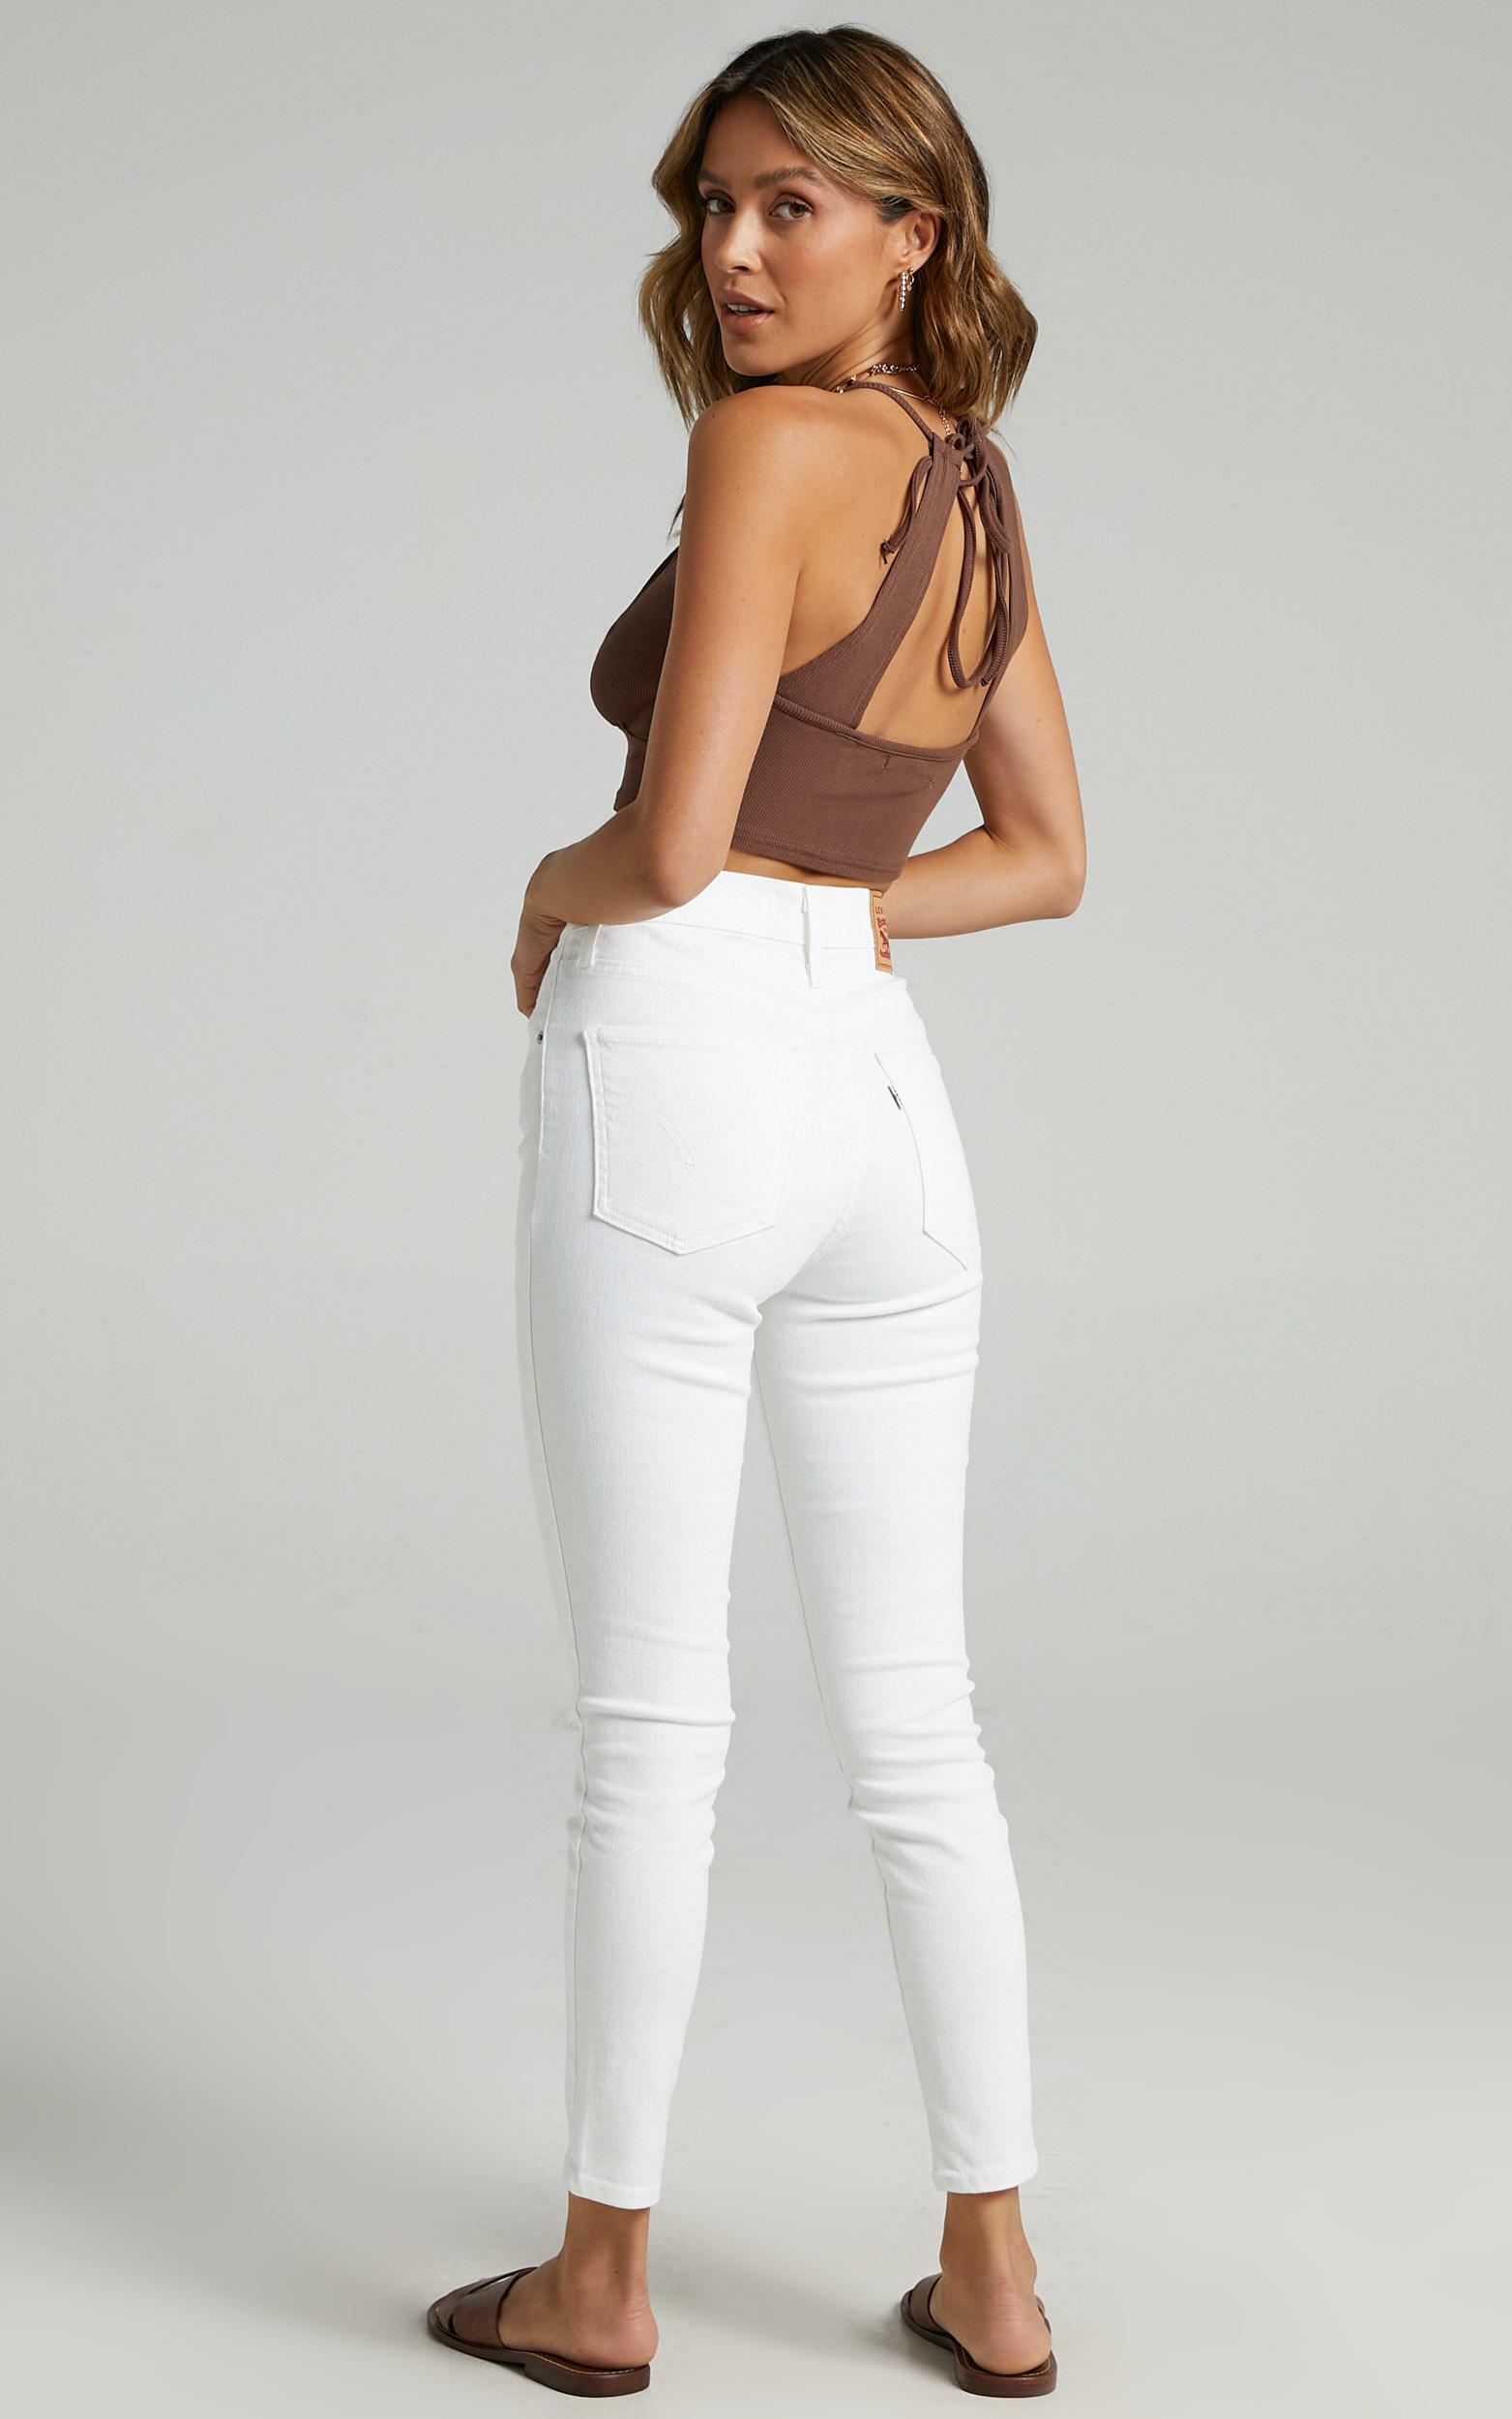 Levi's - Mile High Ankle Skinny Jean in Clean Record | Showpo USA